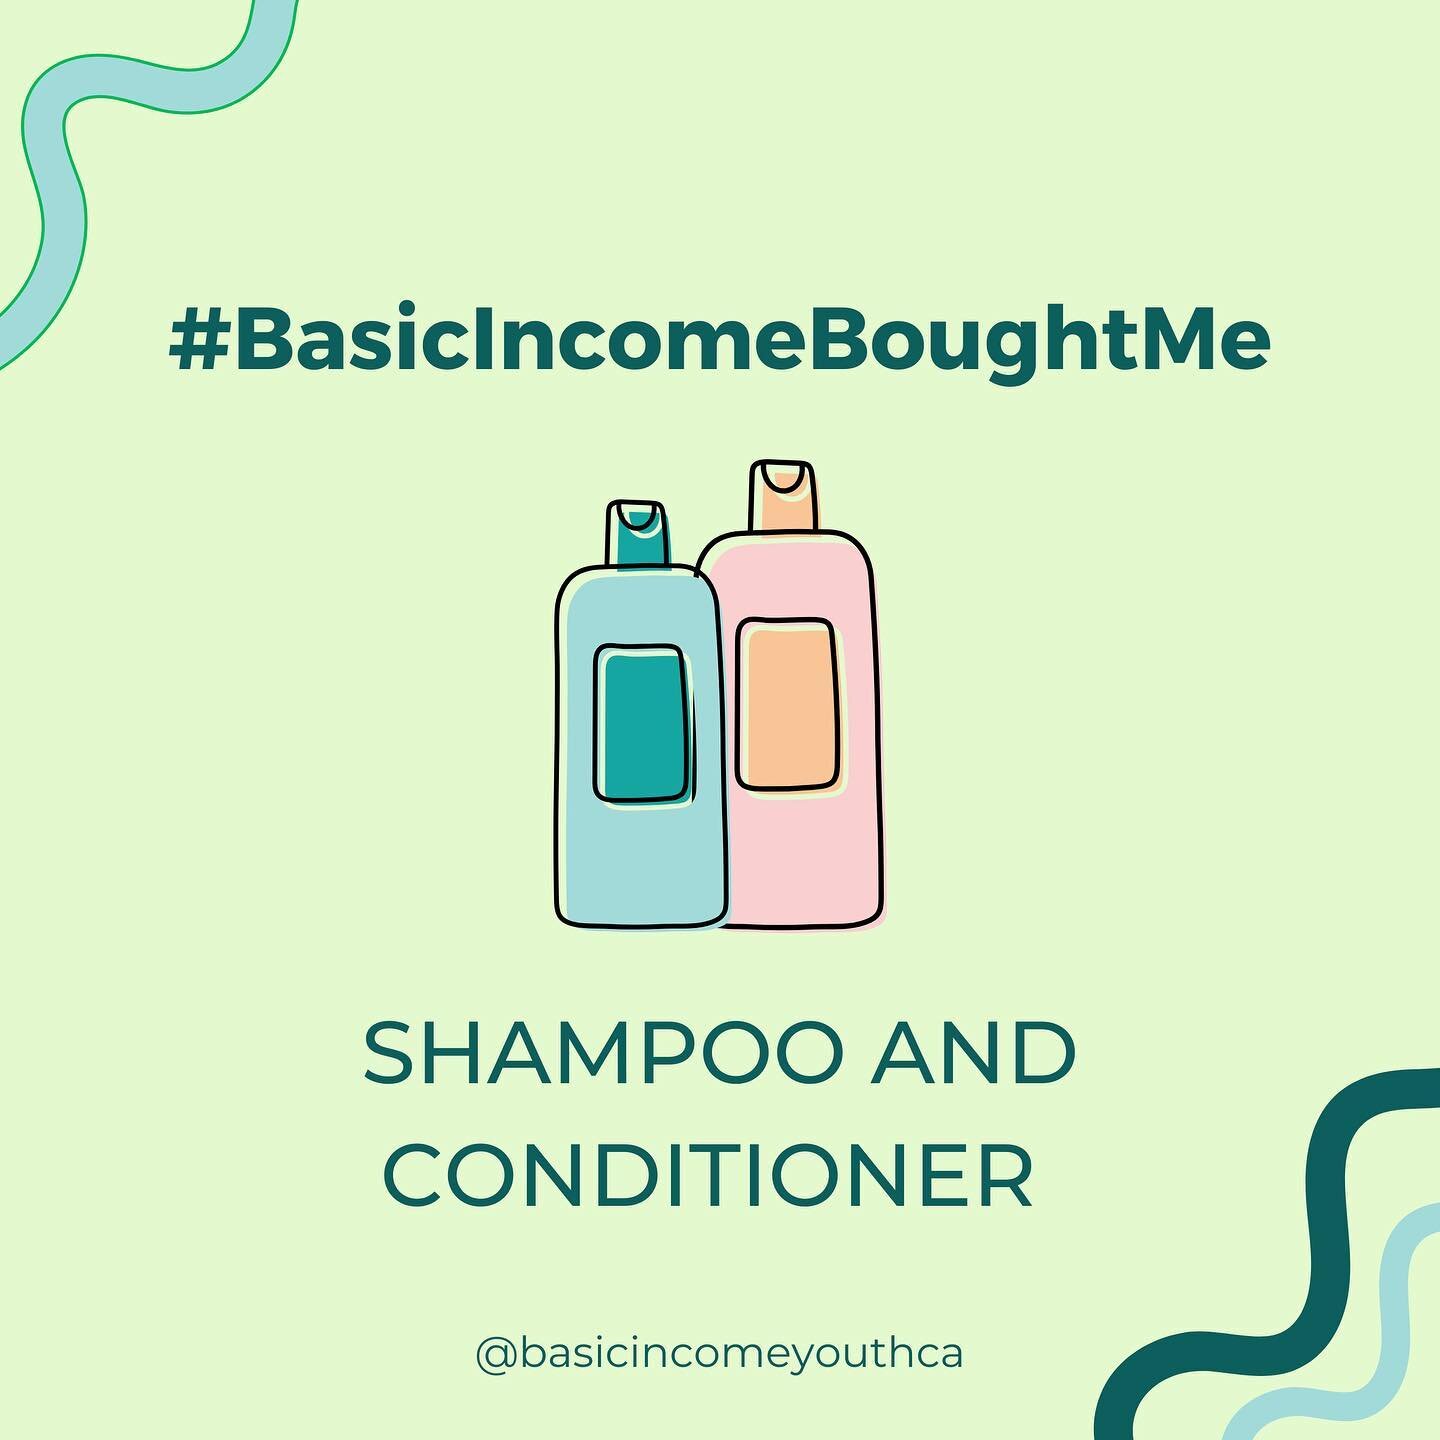 With limited income, many are forced to make tradeoffs - whether that be between paying hydro or phone bills, a bus pass or groceries, or between personal hygiene products. For this OBIP participant, #BasicIncomeBoughtMe shampoo and conditioner - and